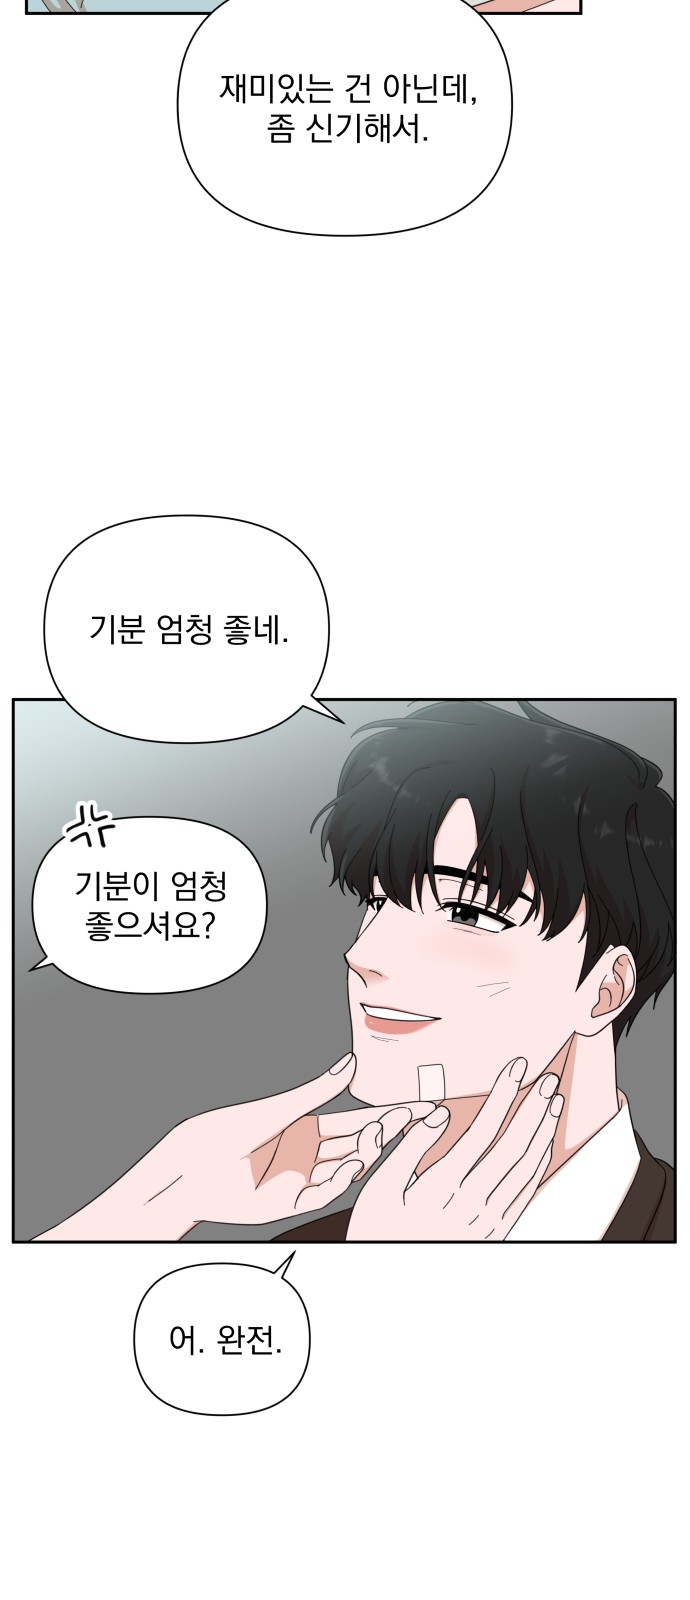 The Man With Pretty Lips - Chapter 16 - Page 59